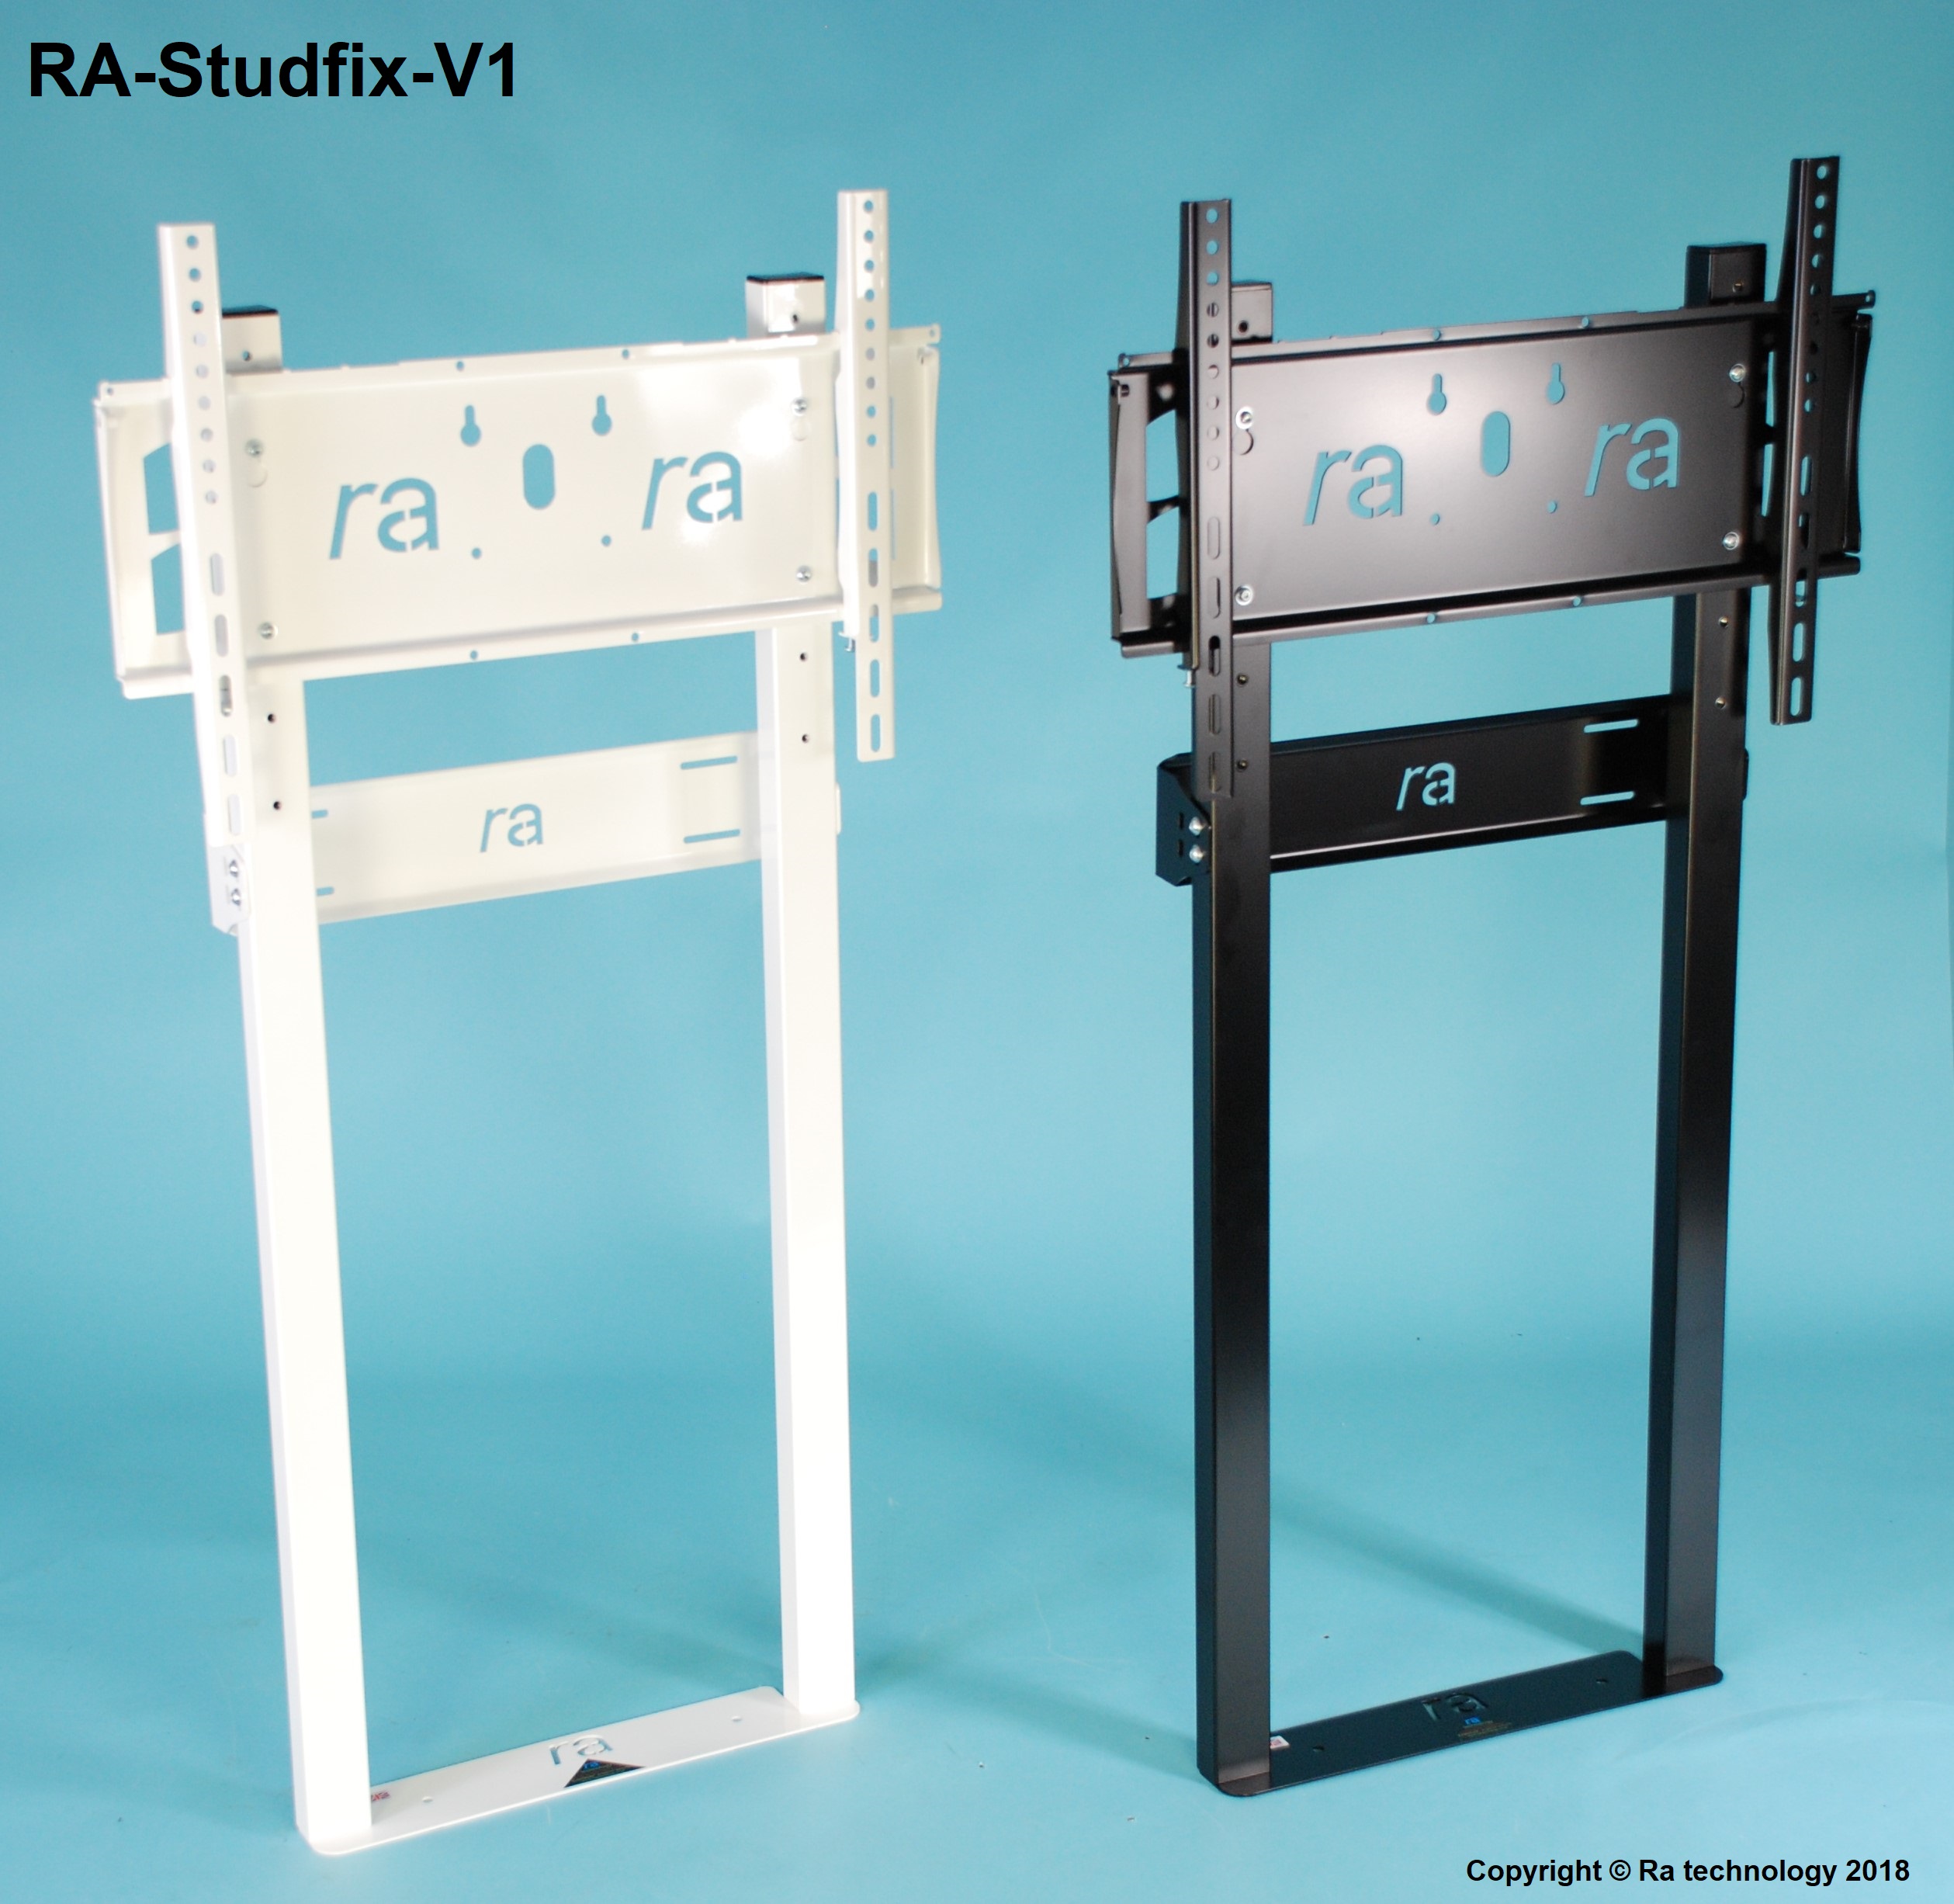 RA-Studfix-V1-LL Wall to Floor Mount for Flat Screens up to 65kg